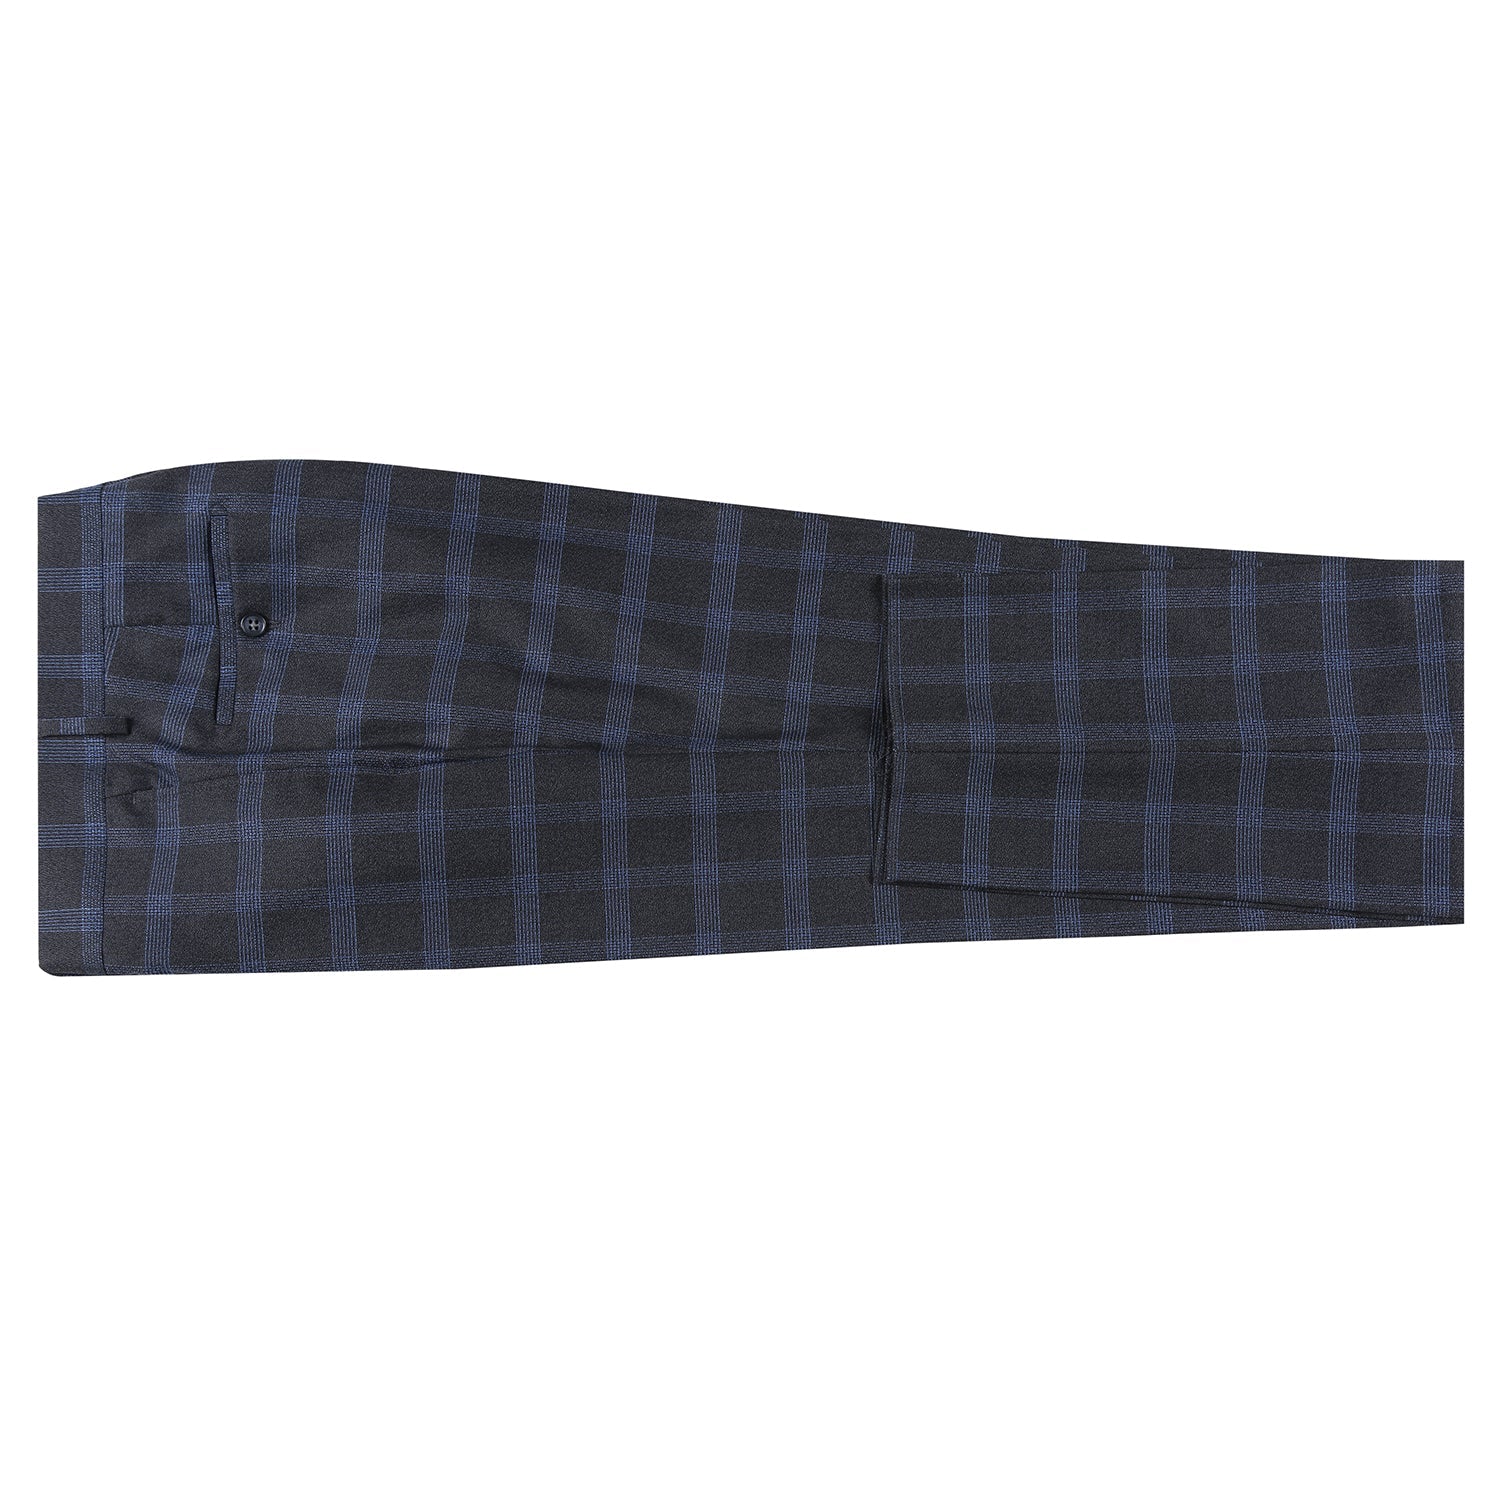 Stretch Performance Single Breasted SLIM FIT Suit in Charcoal and Blue Plaid (Short, Regular, and Long Available) by English Laundry